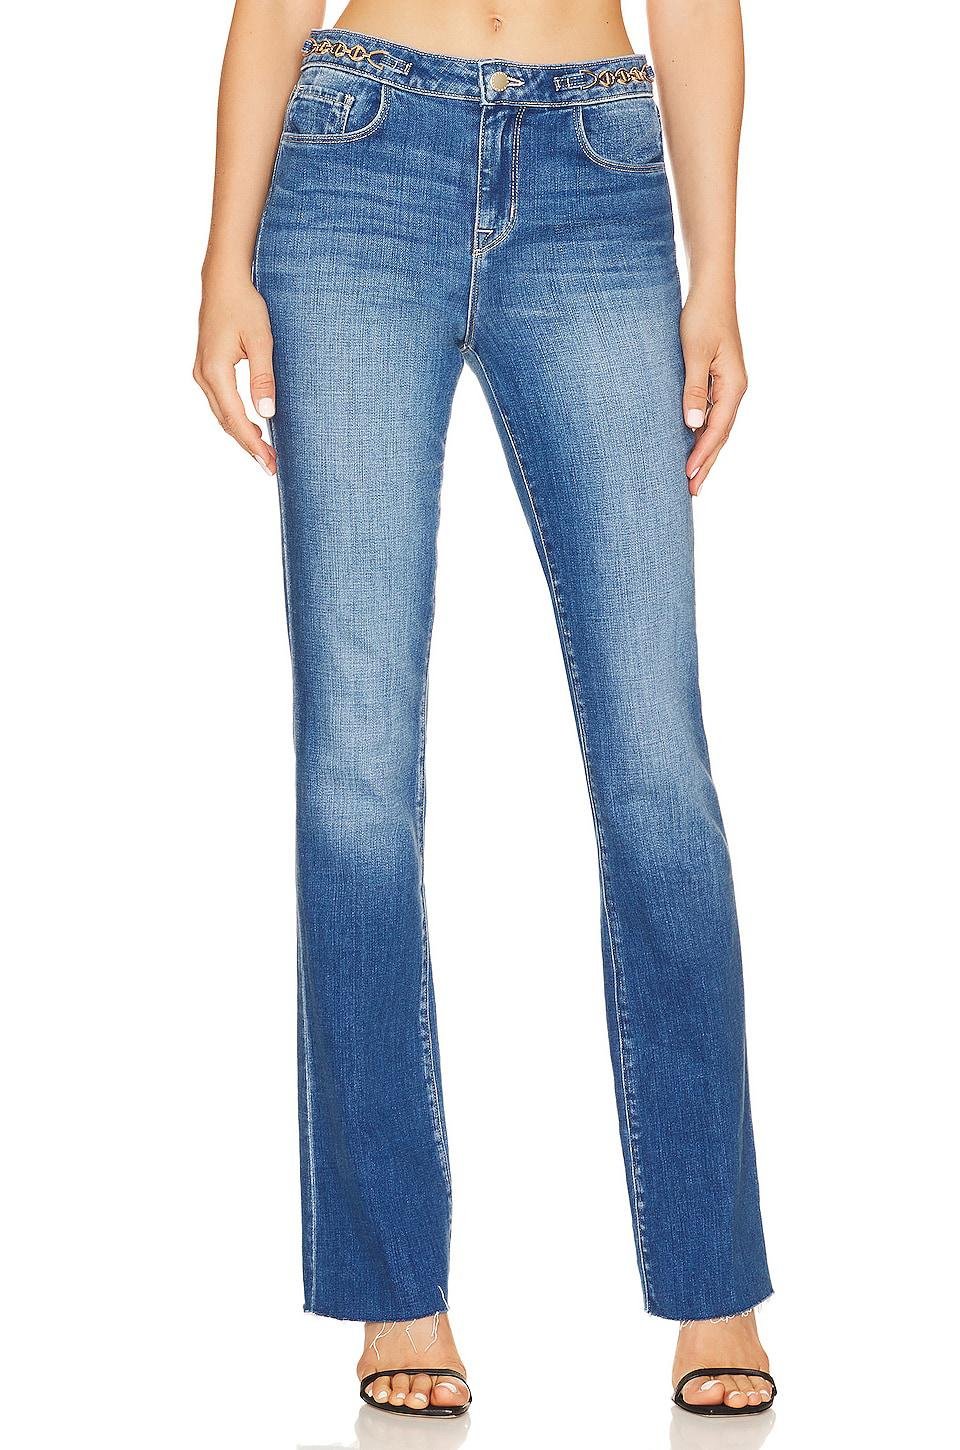 ruth high rise straight gold chain jeans by L'AGENCE | jellibeans